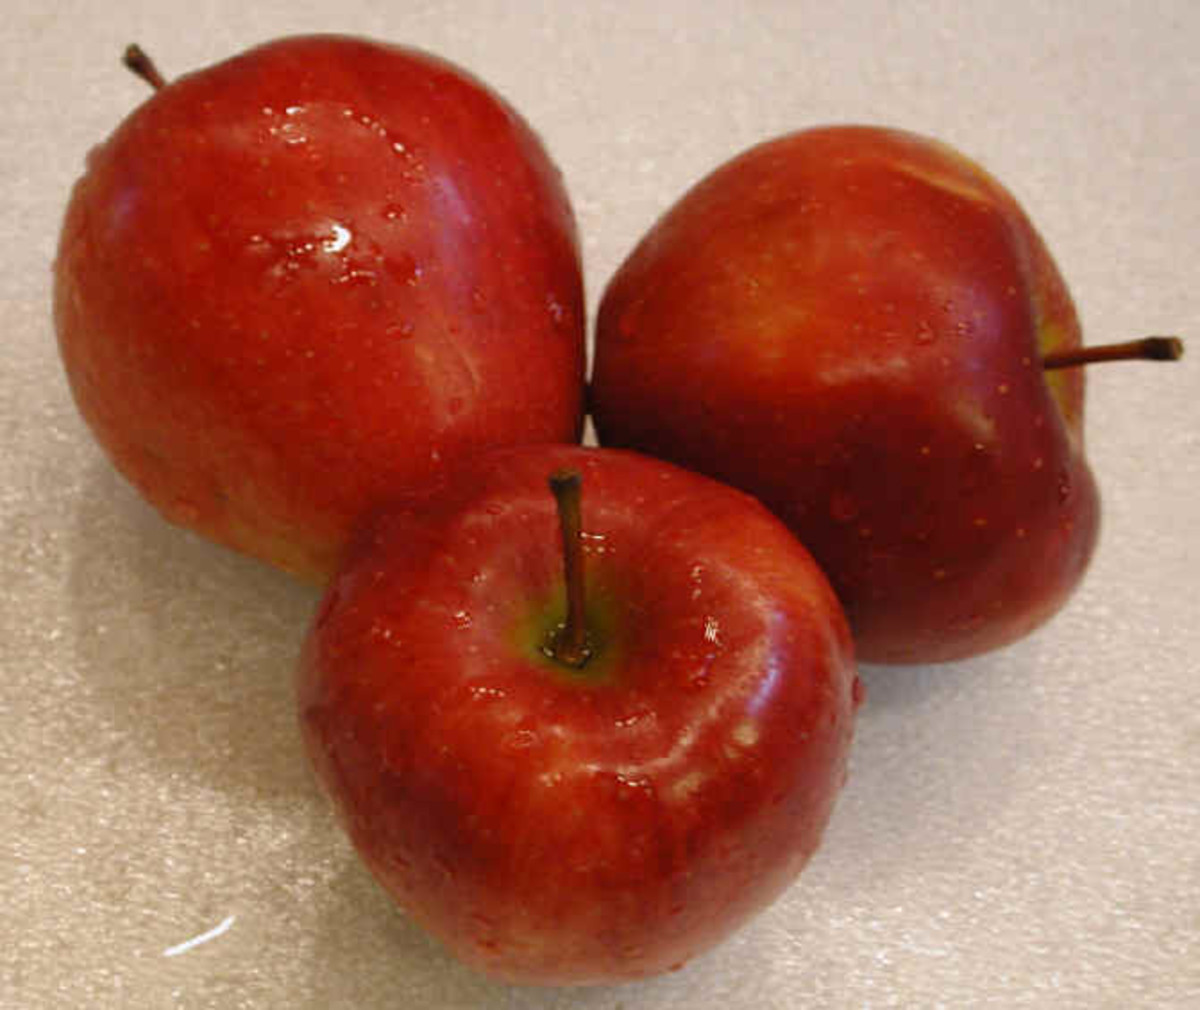 Red delicious apples